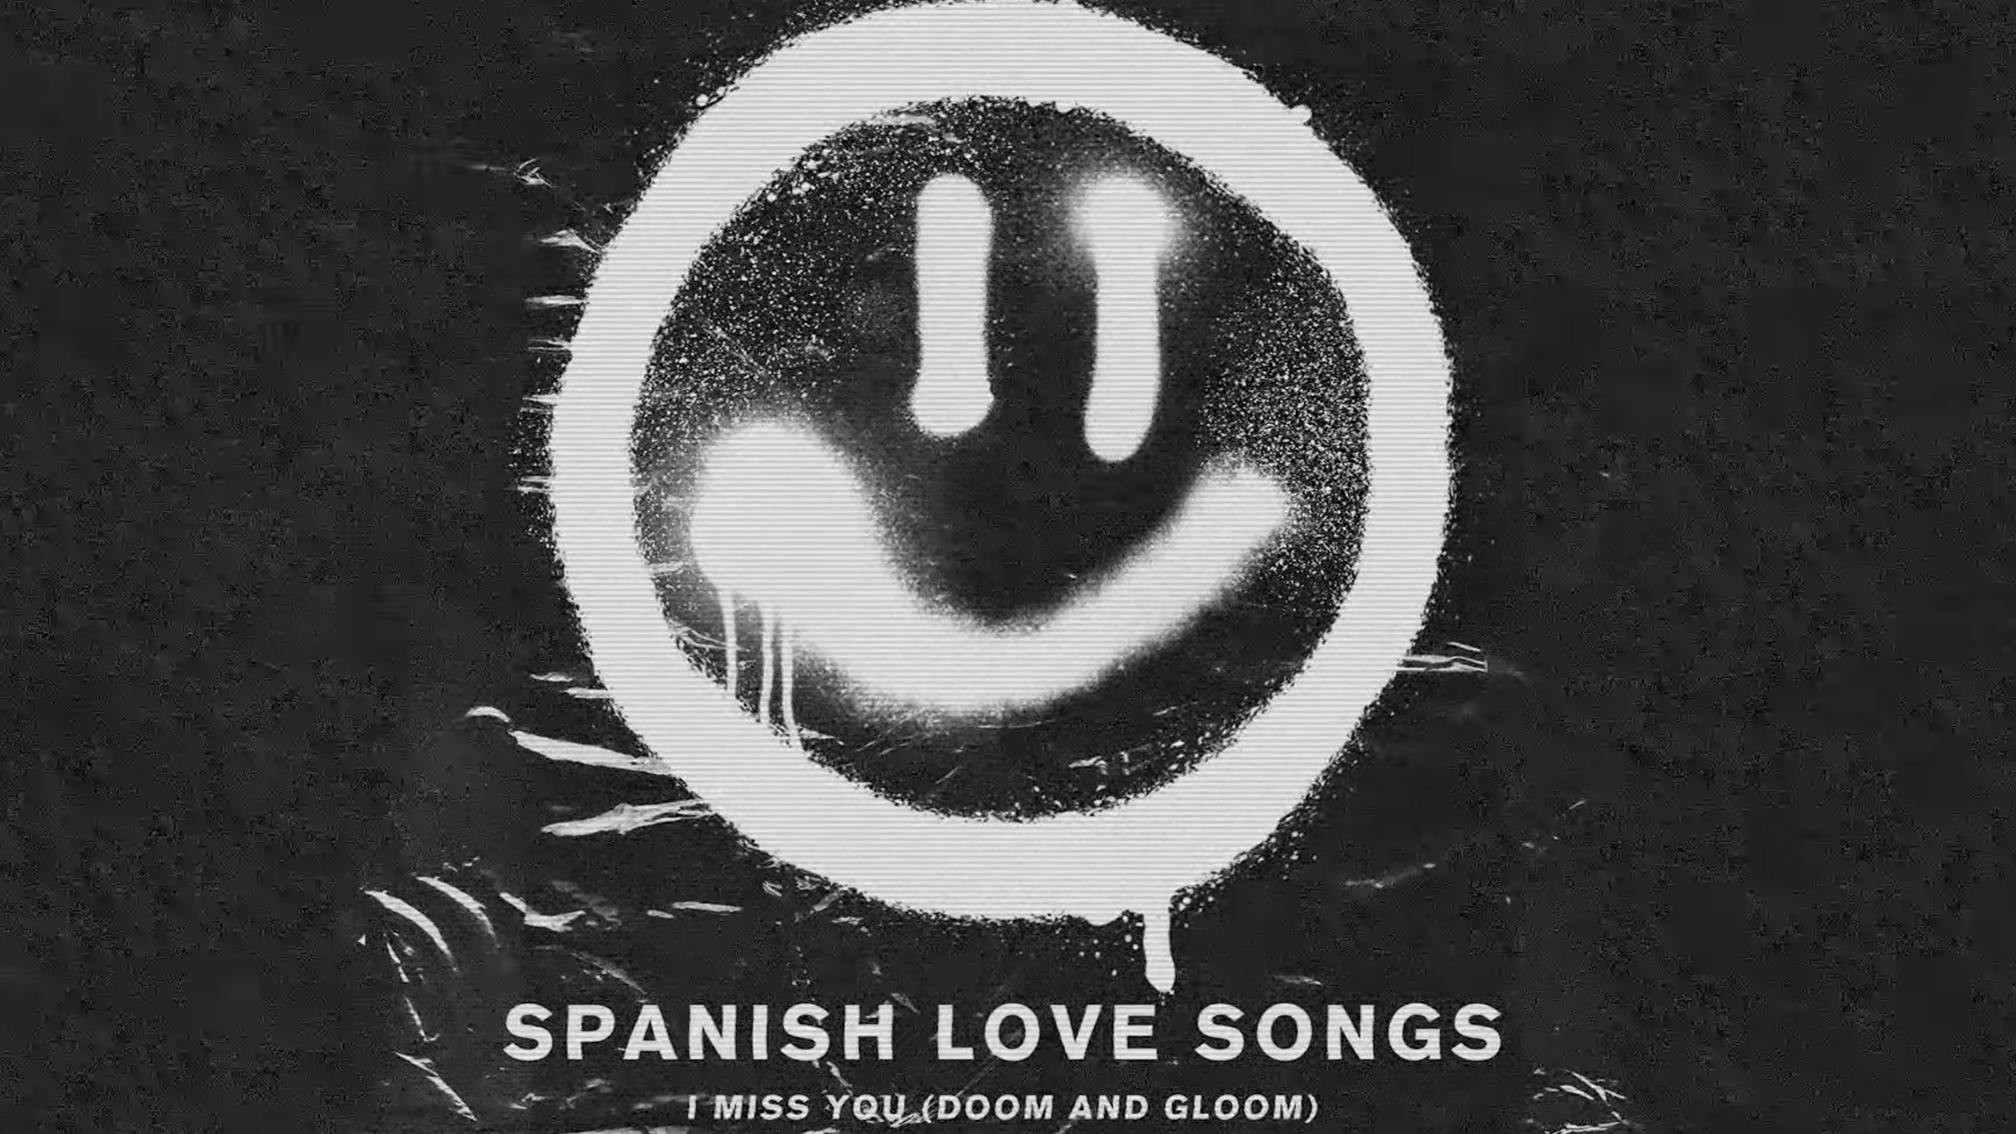 Listen: Spanish Love Songs release 'doom and gloom' cover of blink-182's I Miss You